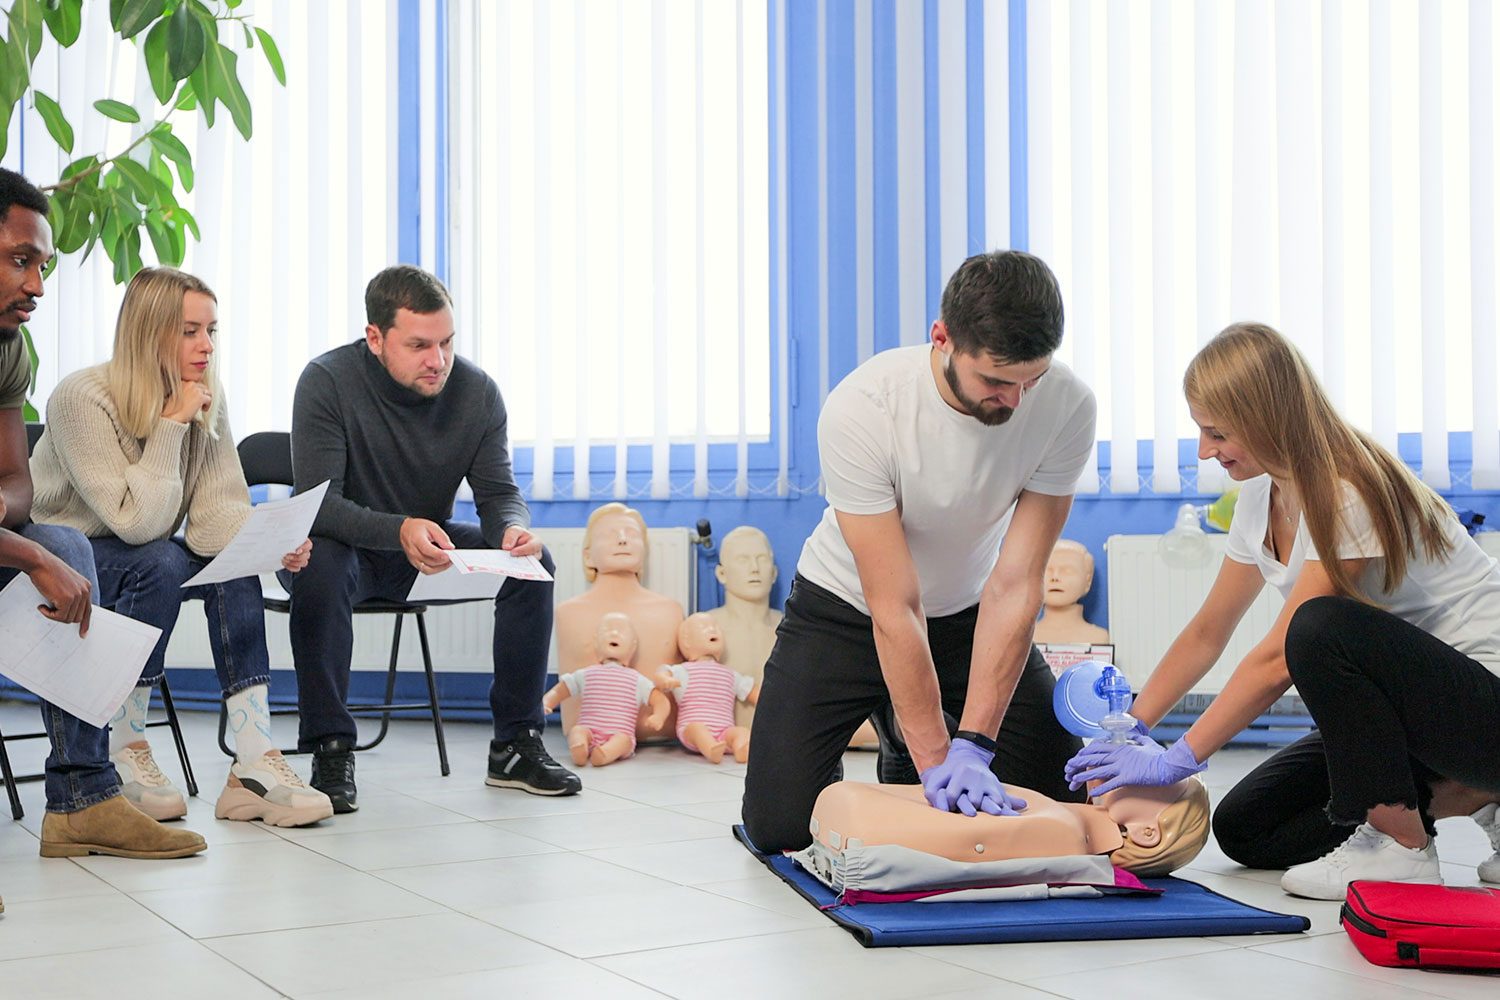 Paediatric-First-Aid-Why-It-Is-Essential-For-Parents-And-Childcare-Providers--01